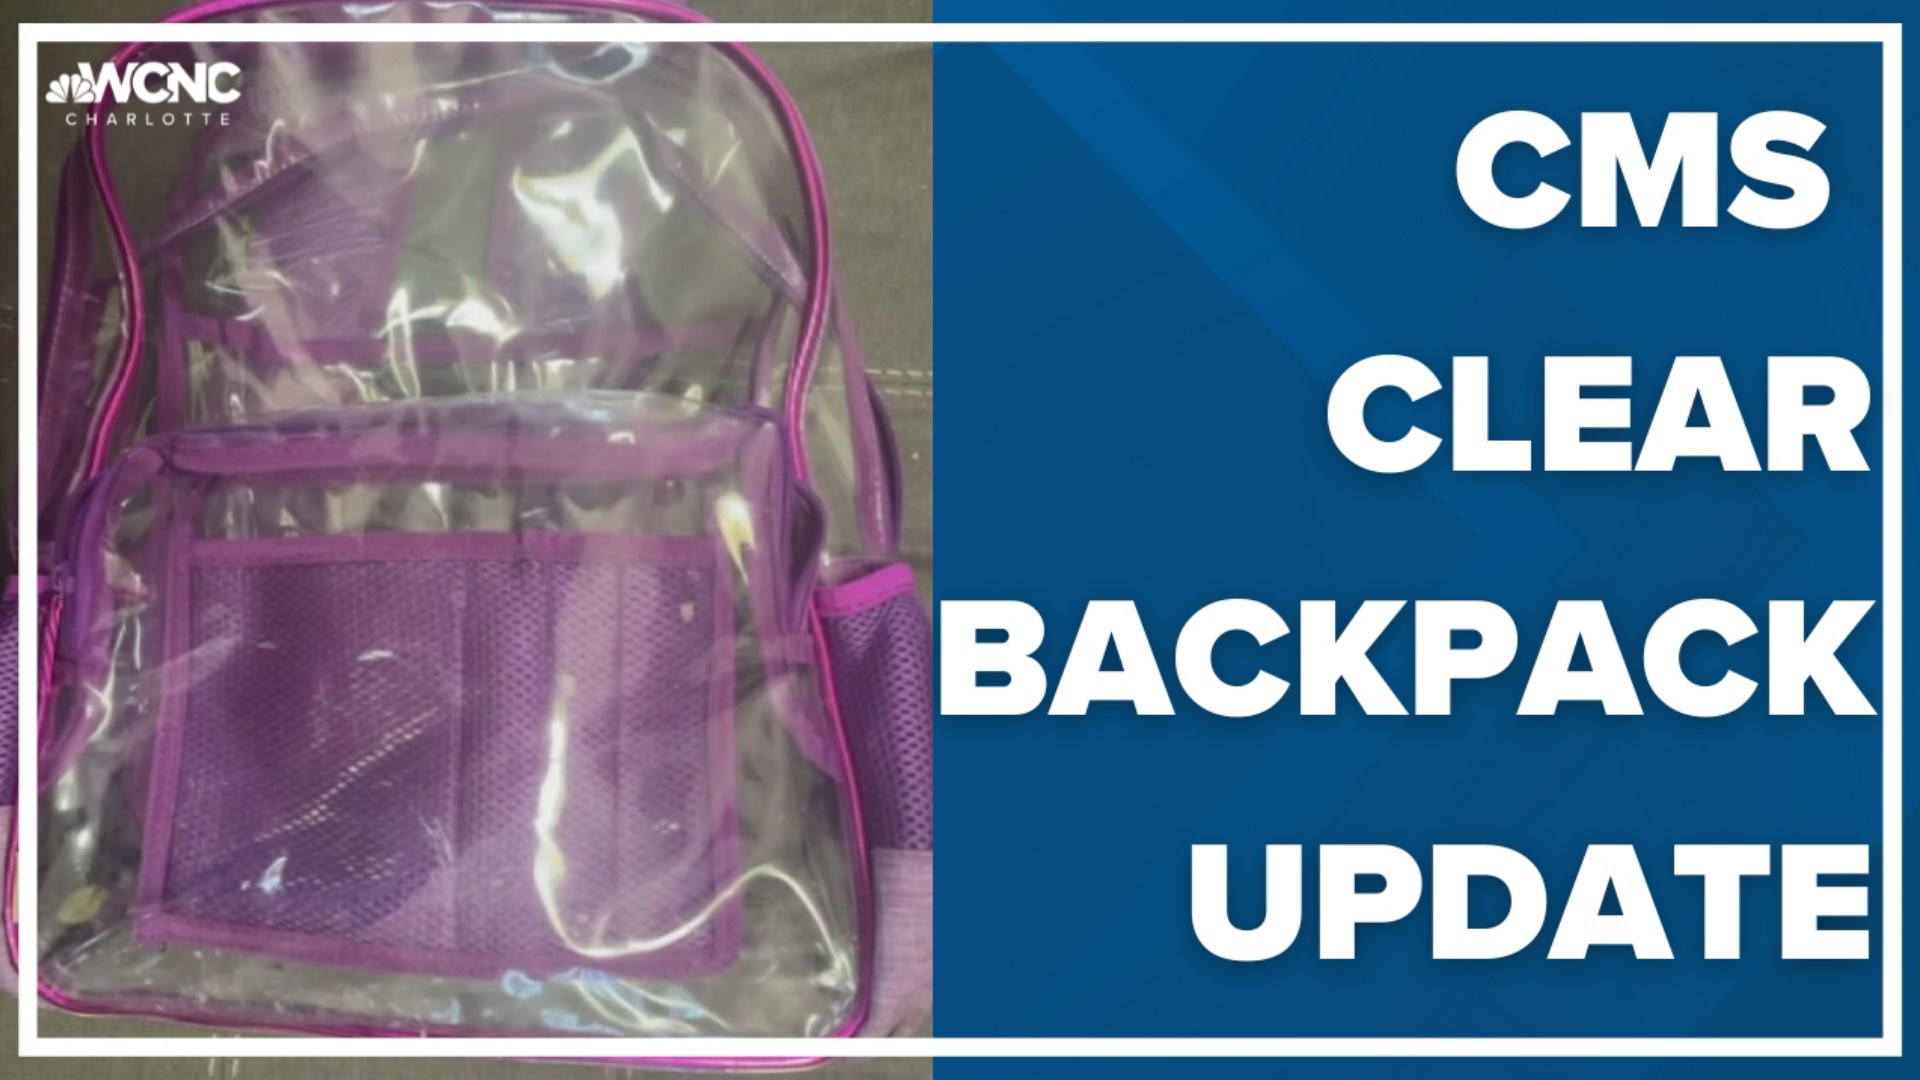 The new owner said the 45,980 clear backpacks initially planned for CMS students will now be sold at a wholesale market.